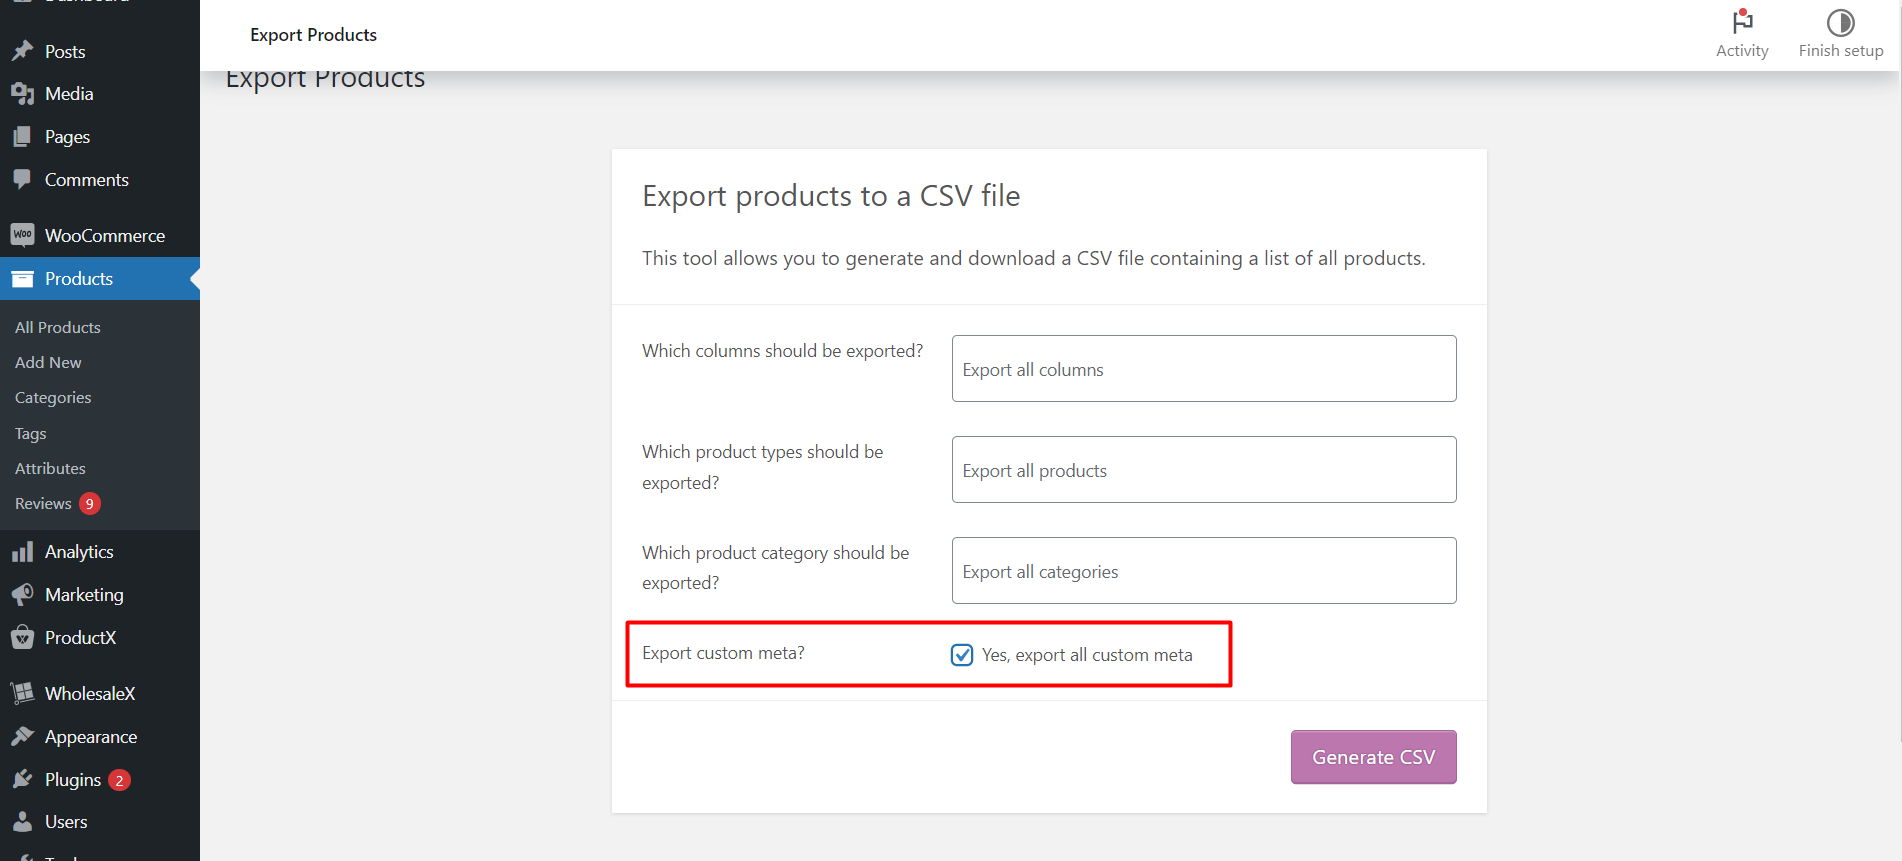 Exporting Custom Meta for Products